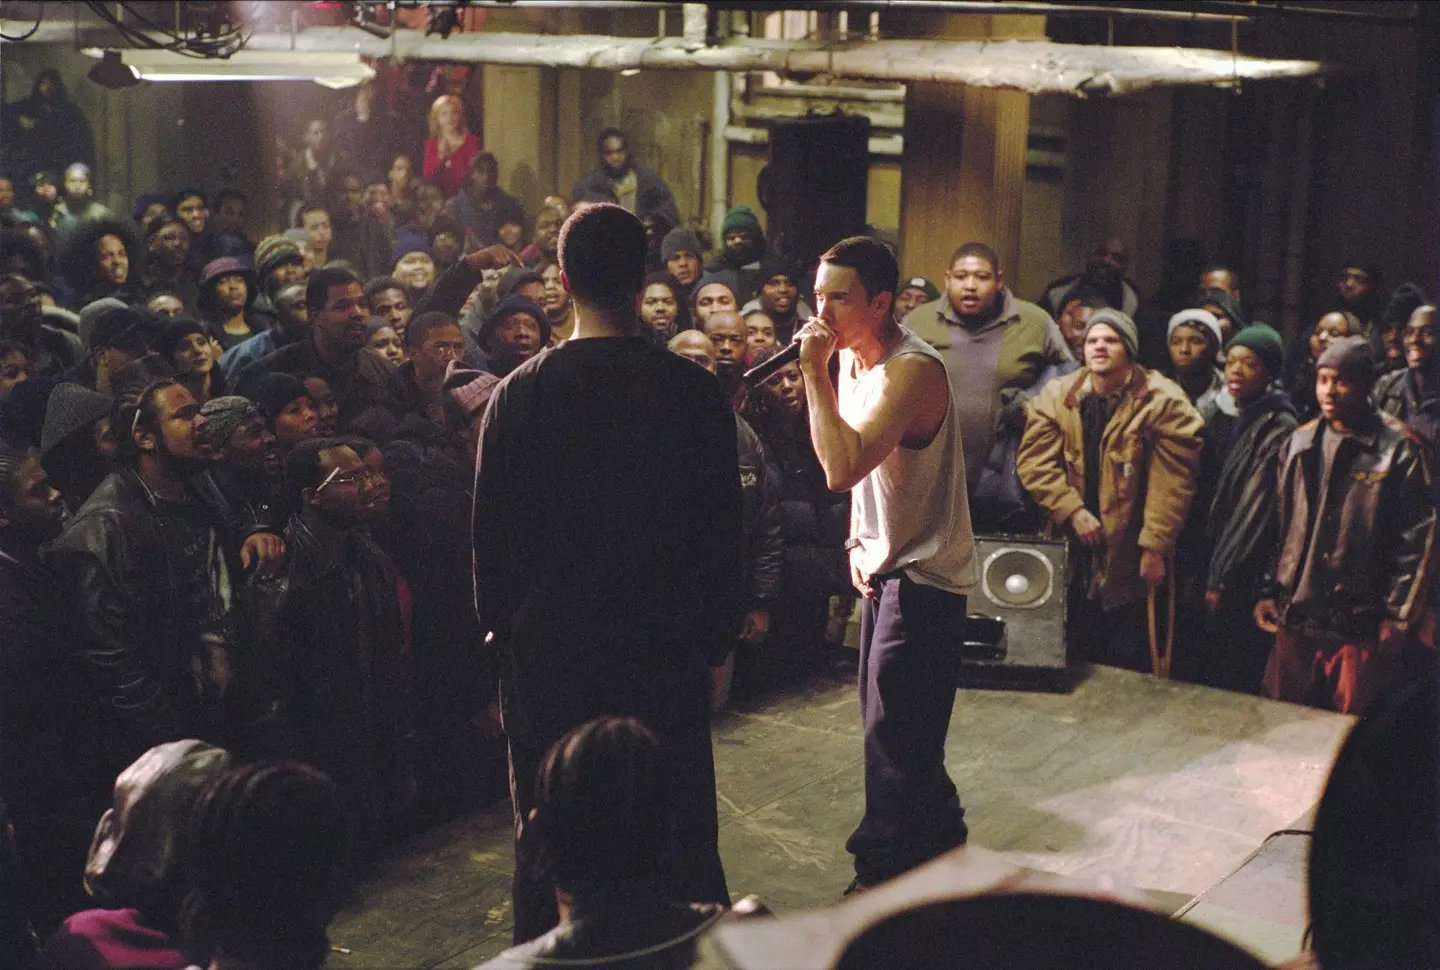 Eminem starred in 2002 movie 8 Mile, which was semi-biographical.